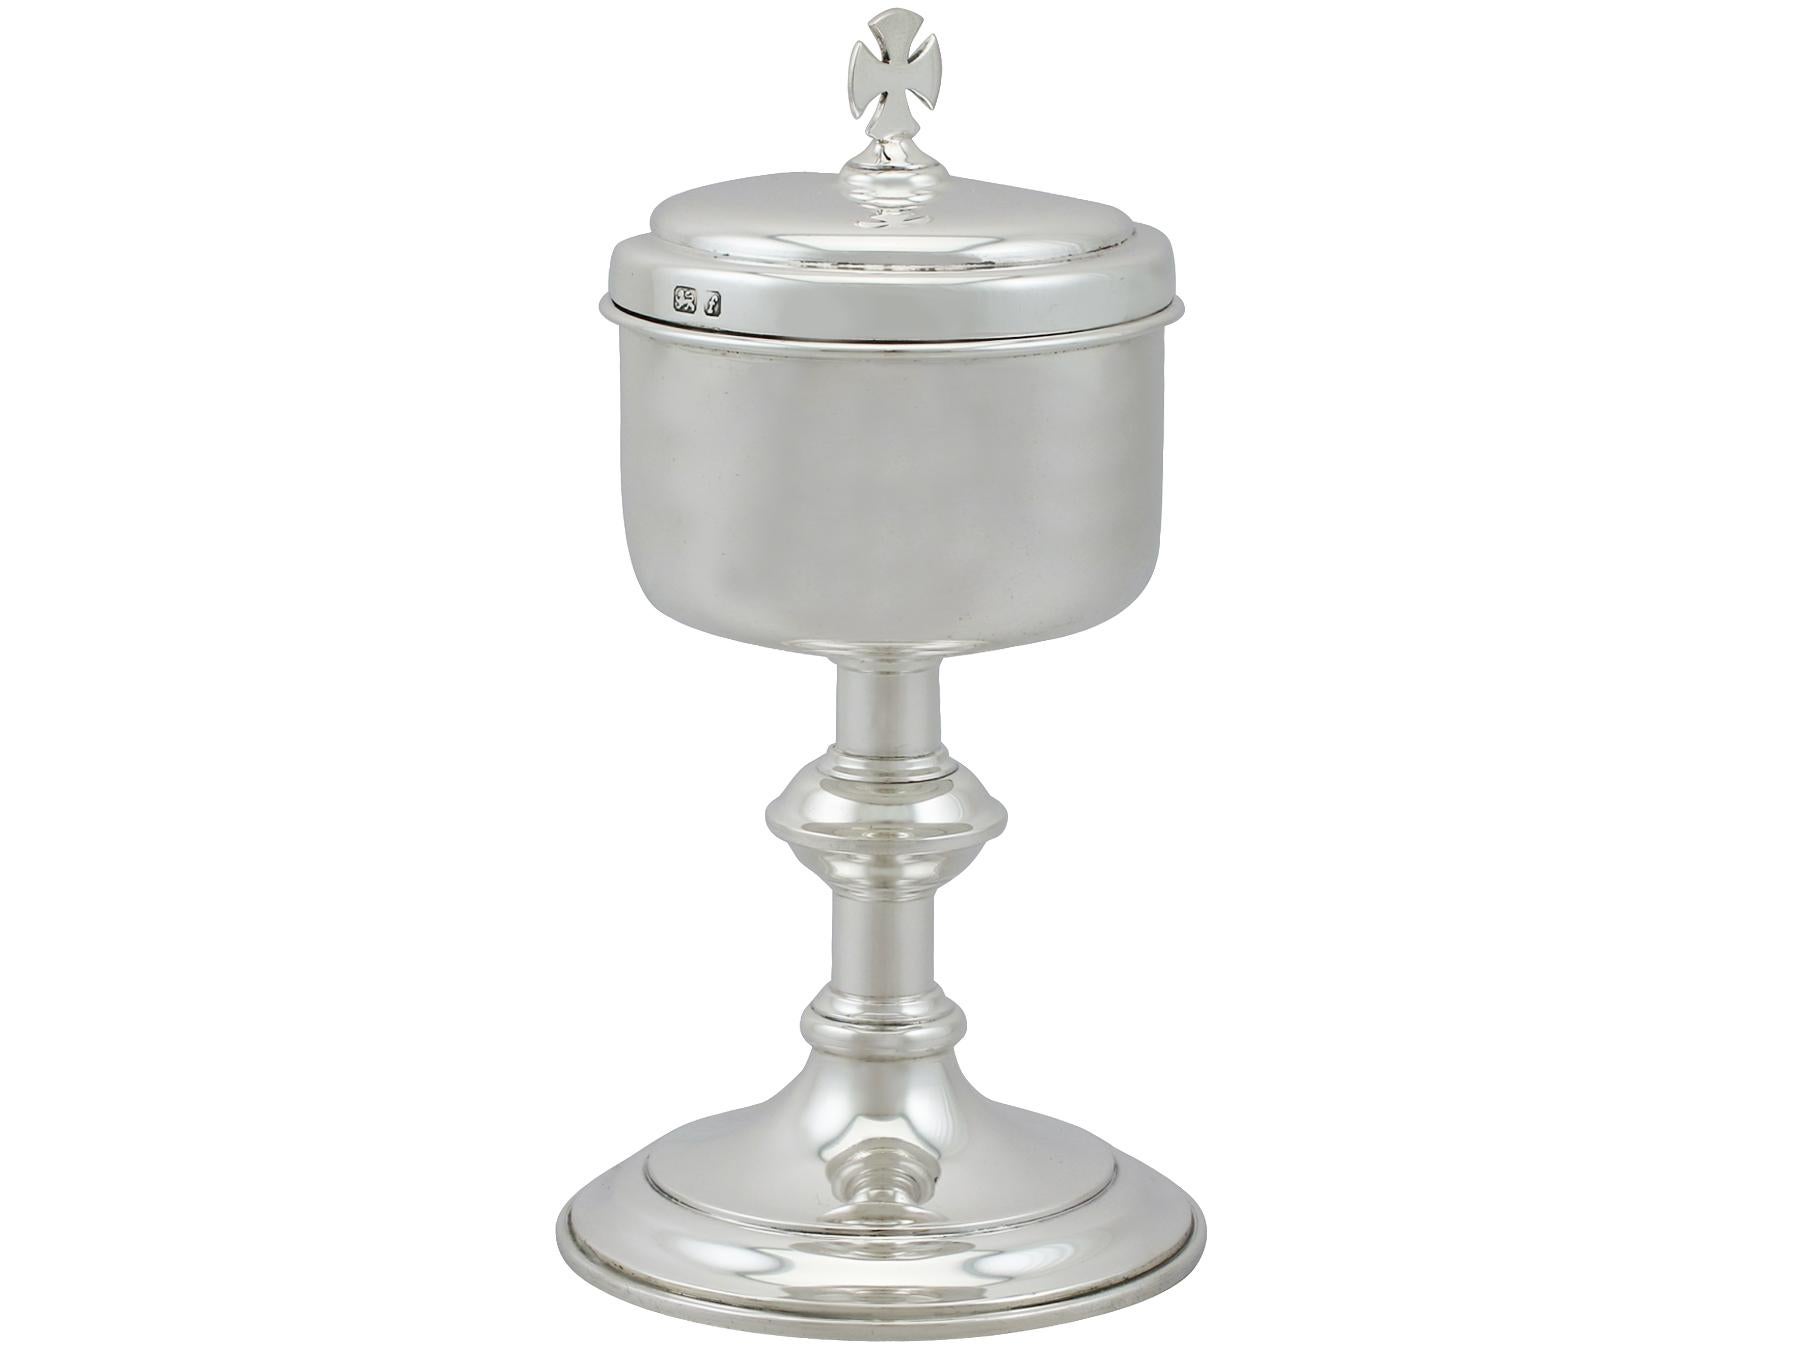 An exceptional, fine and impressive vintage Elizabeth II English sterling silver ecclesiastical ciborium; an addition to our religious silverware collection.

This exceptional vintage Elizabeth II sterling silver chalice / ciborium* has a circular